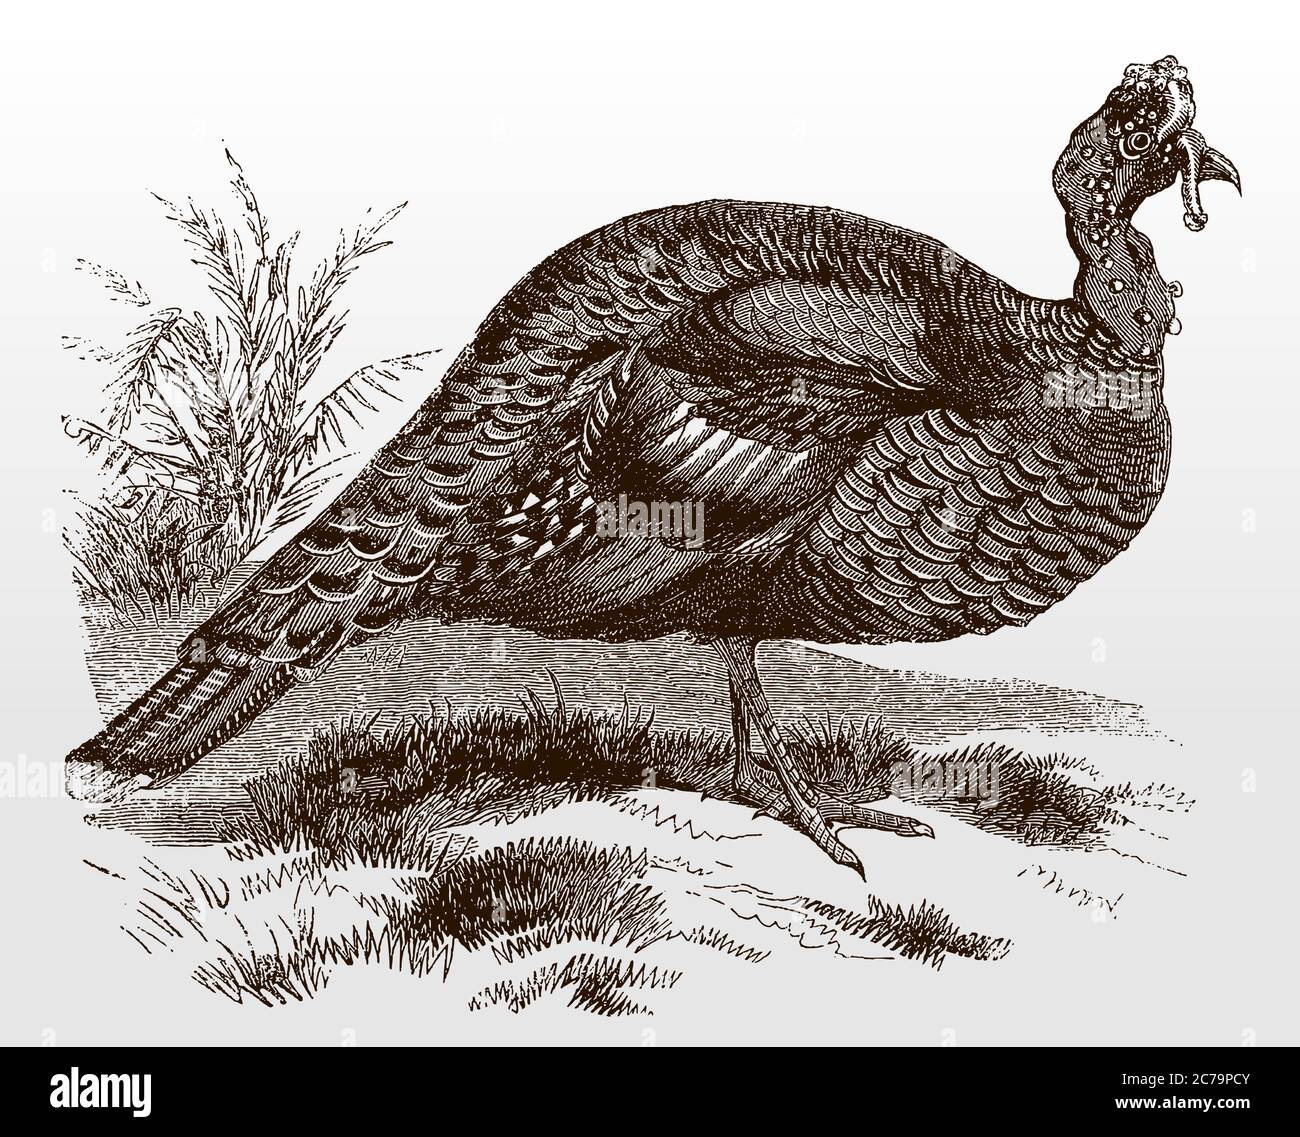 Ocellated turkey, meleagris ocellata, a bird from Central America in side view standing in a landscape, after an antique illustration from 19c Stock Vector